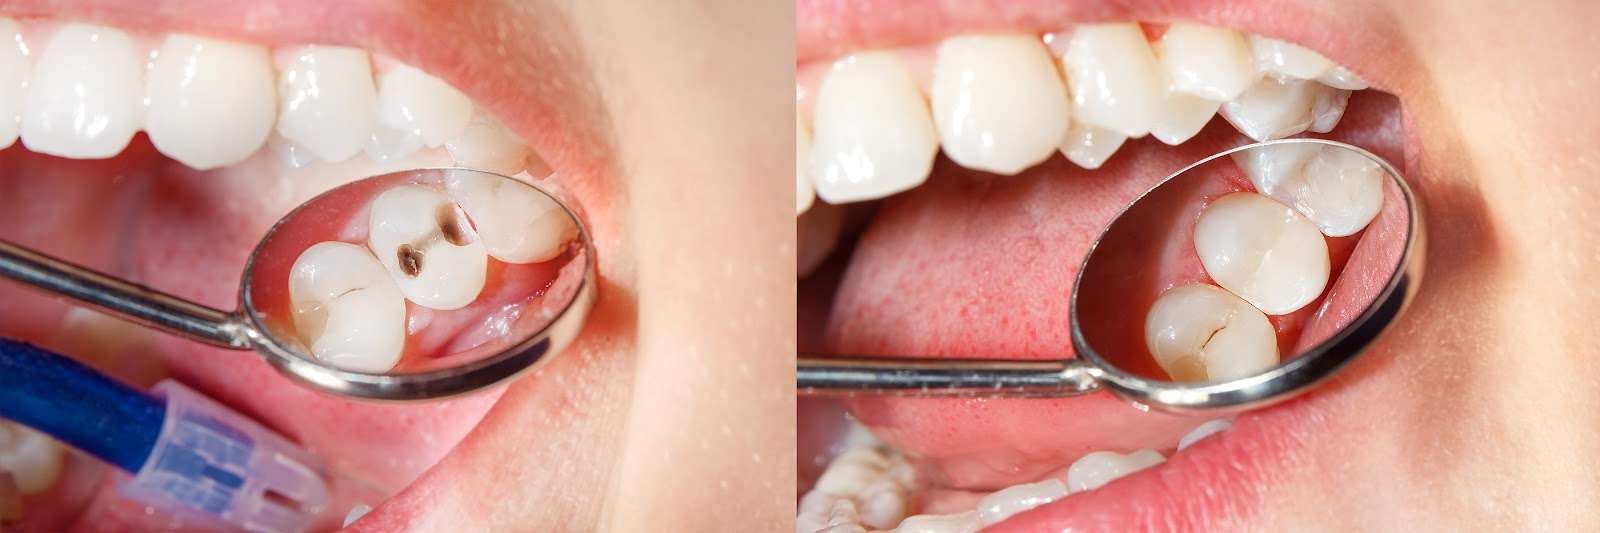 Composite Fillings in Geelong - Before and After